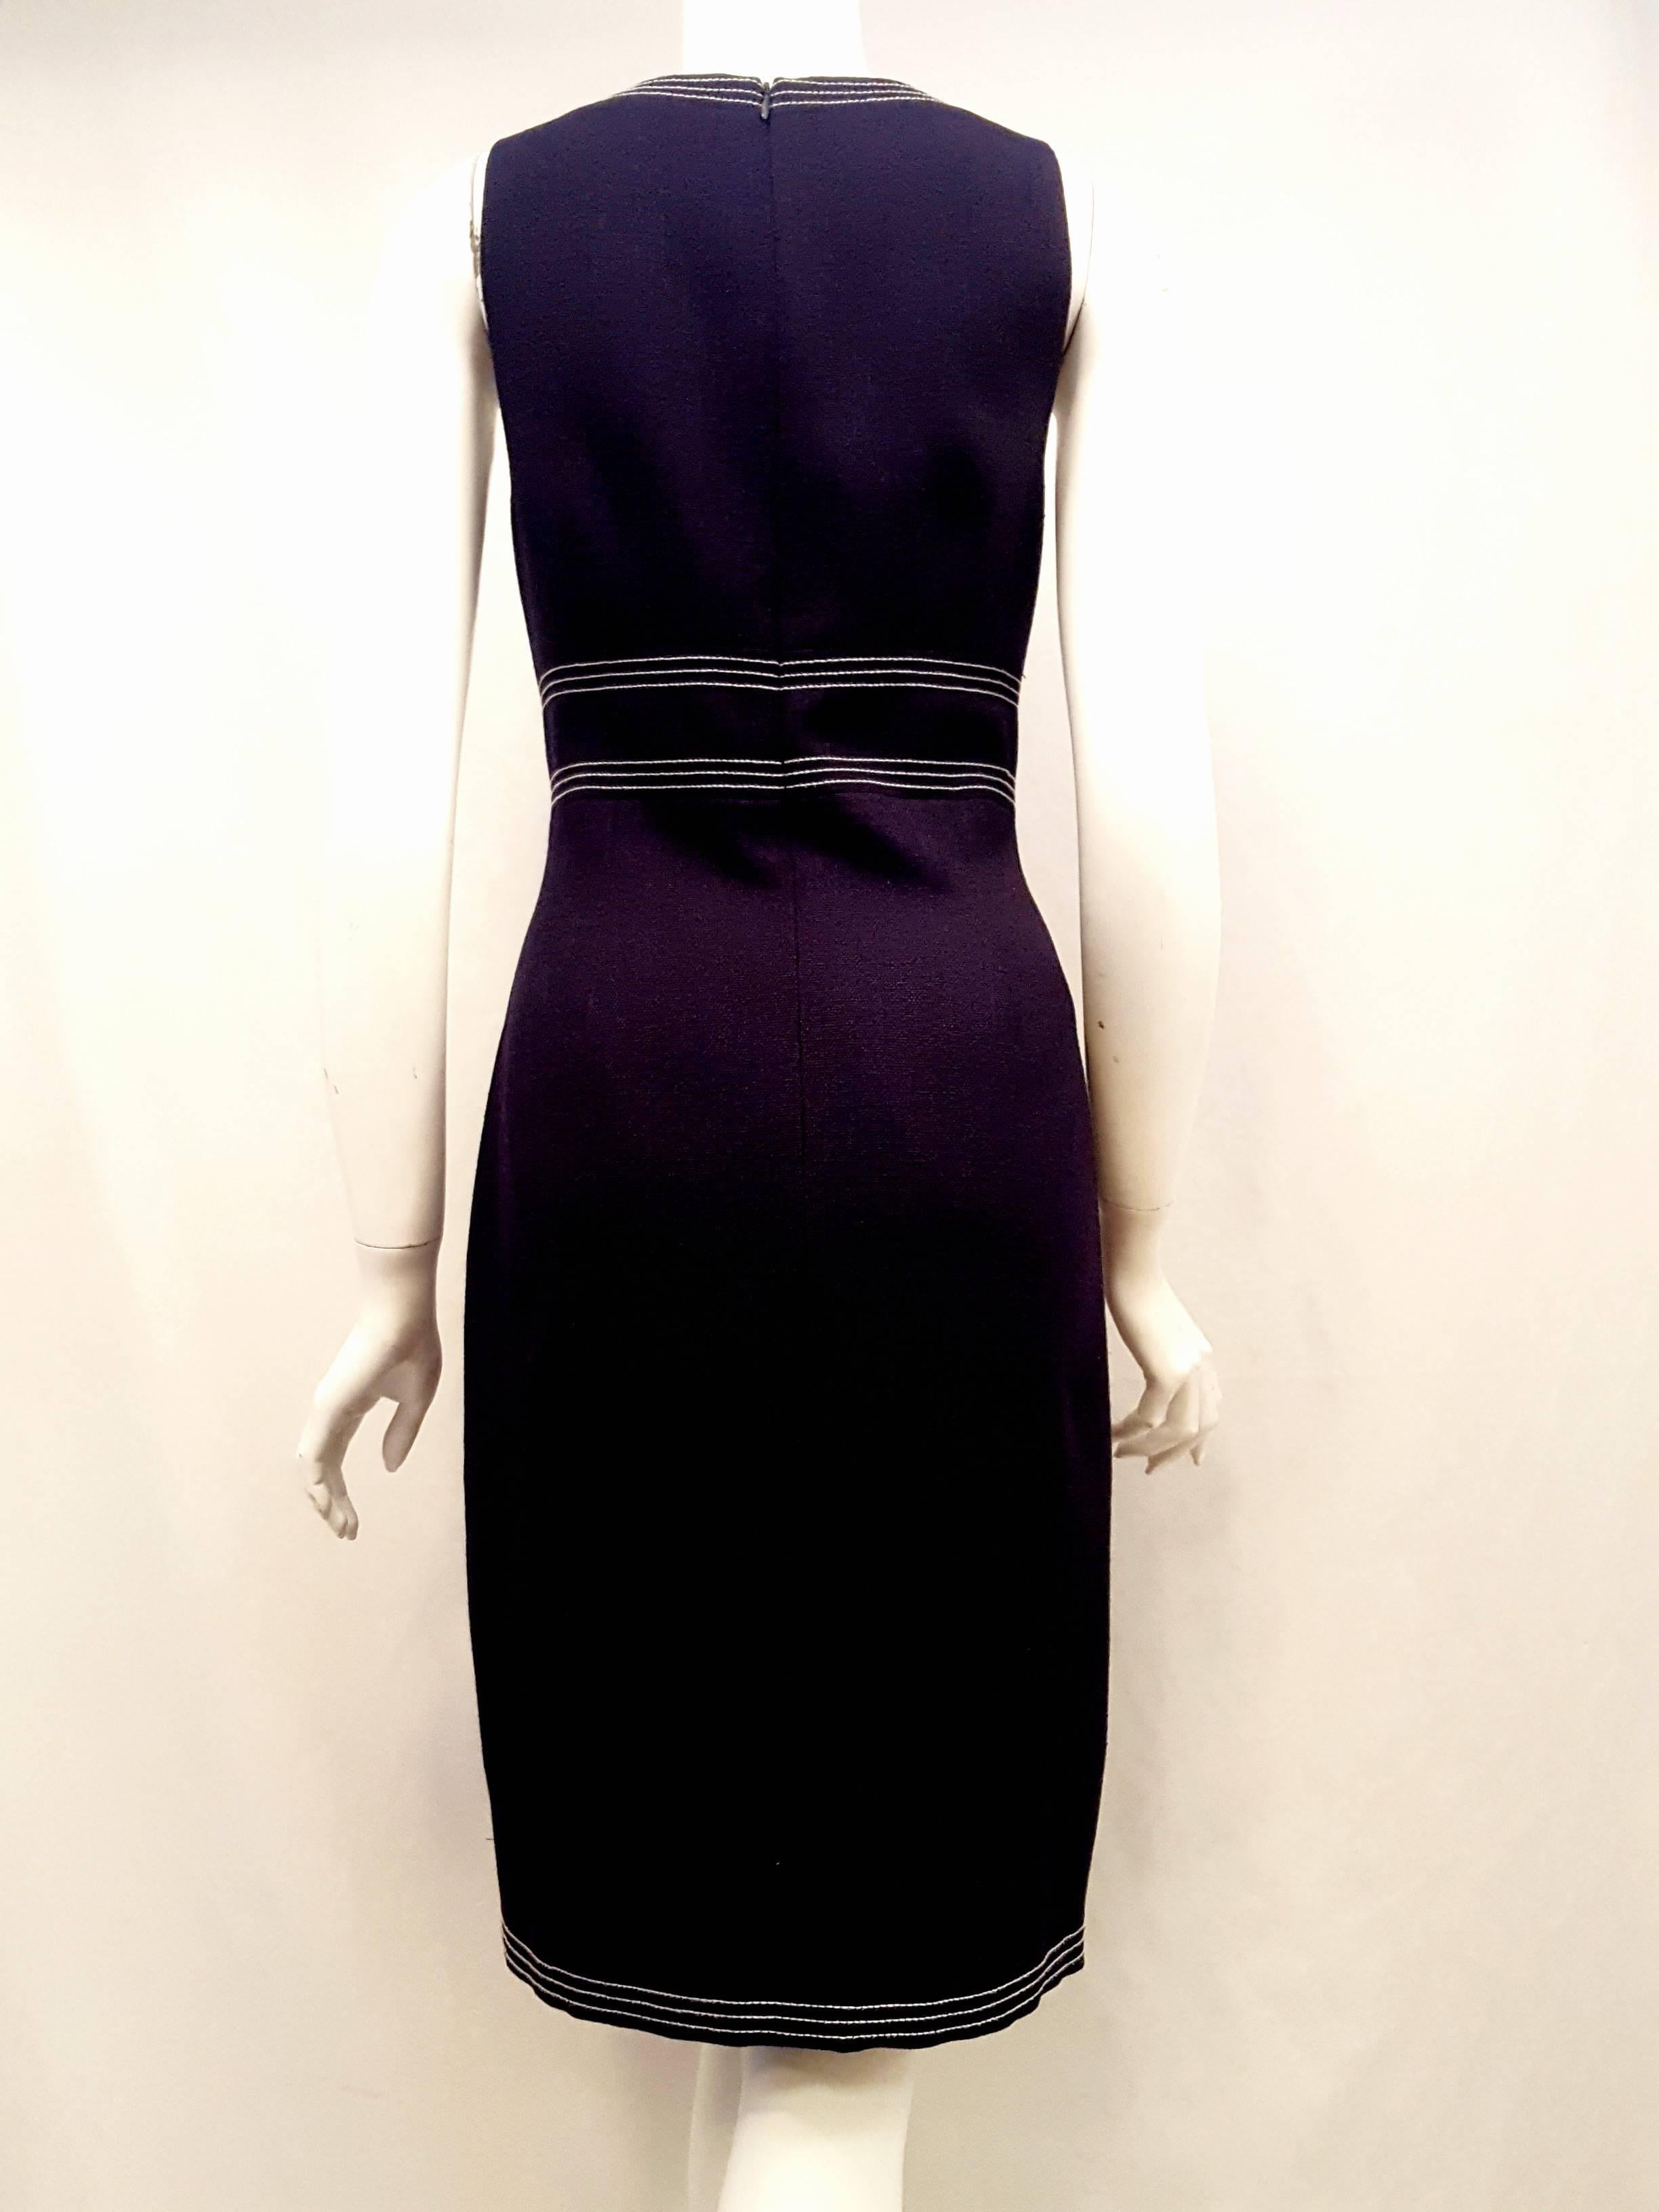 This David Meister sleeveless dress with white stitching around neckline, empire waist and hem is perfect for flawless professional attire at the office and then adding a cashmere sweater or bolero jacket for that special date. Also, a decorative